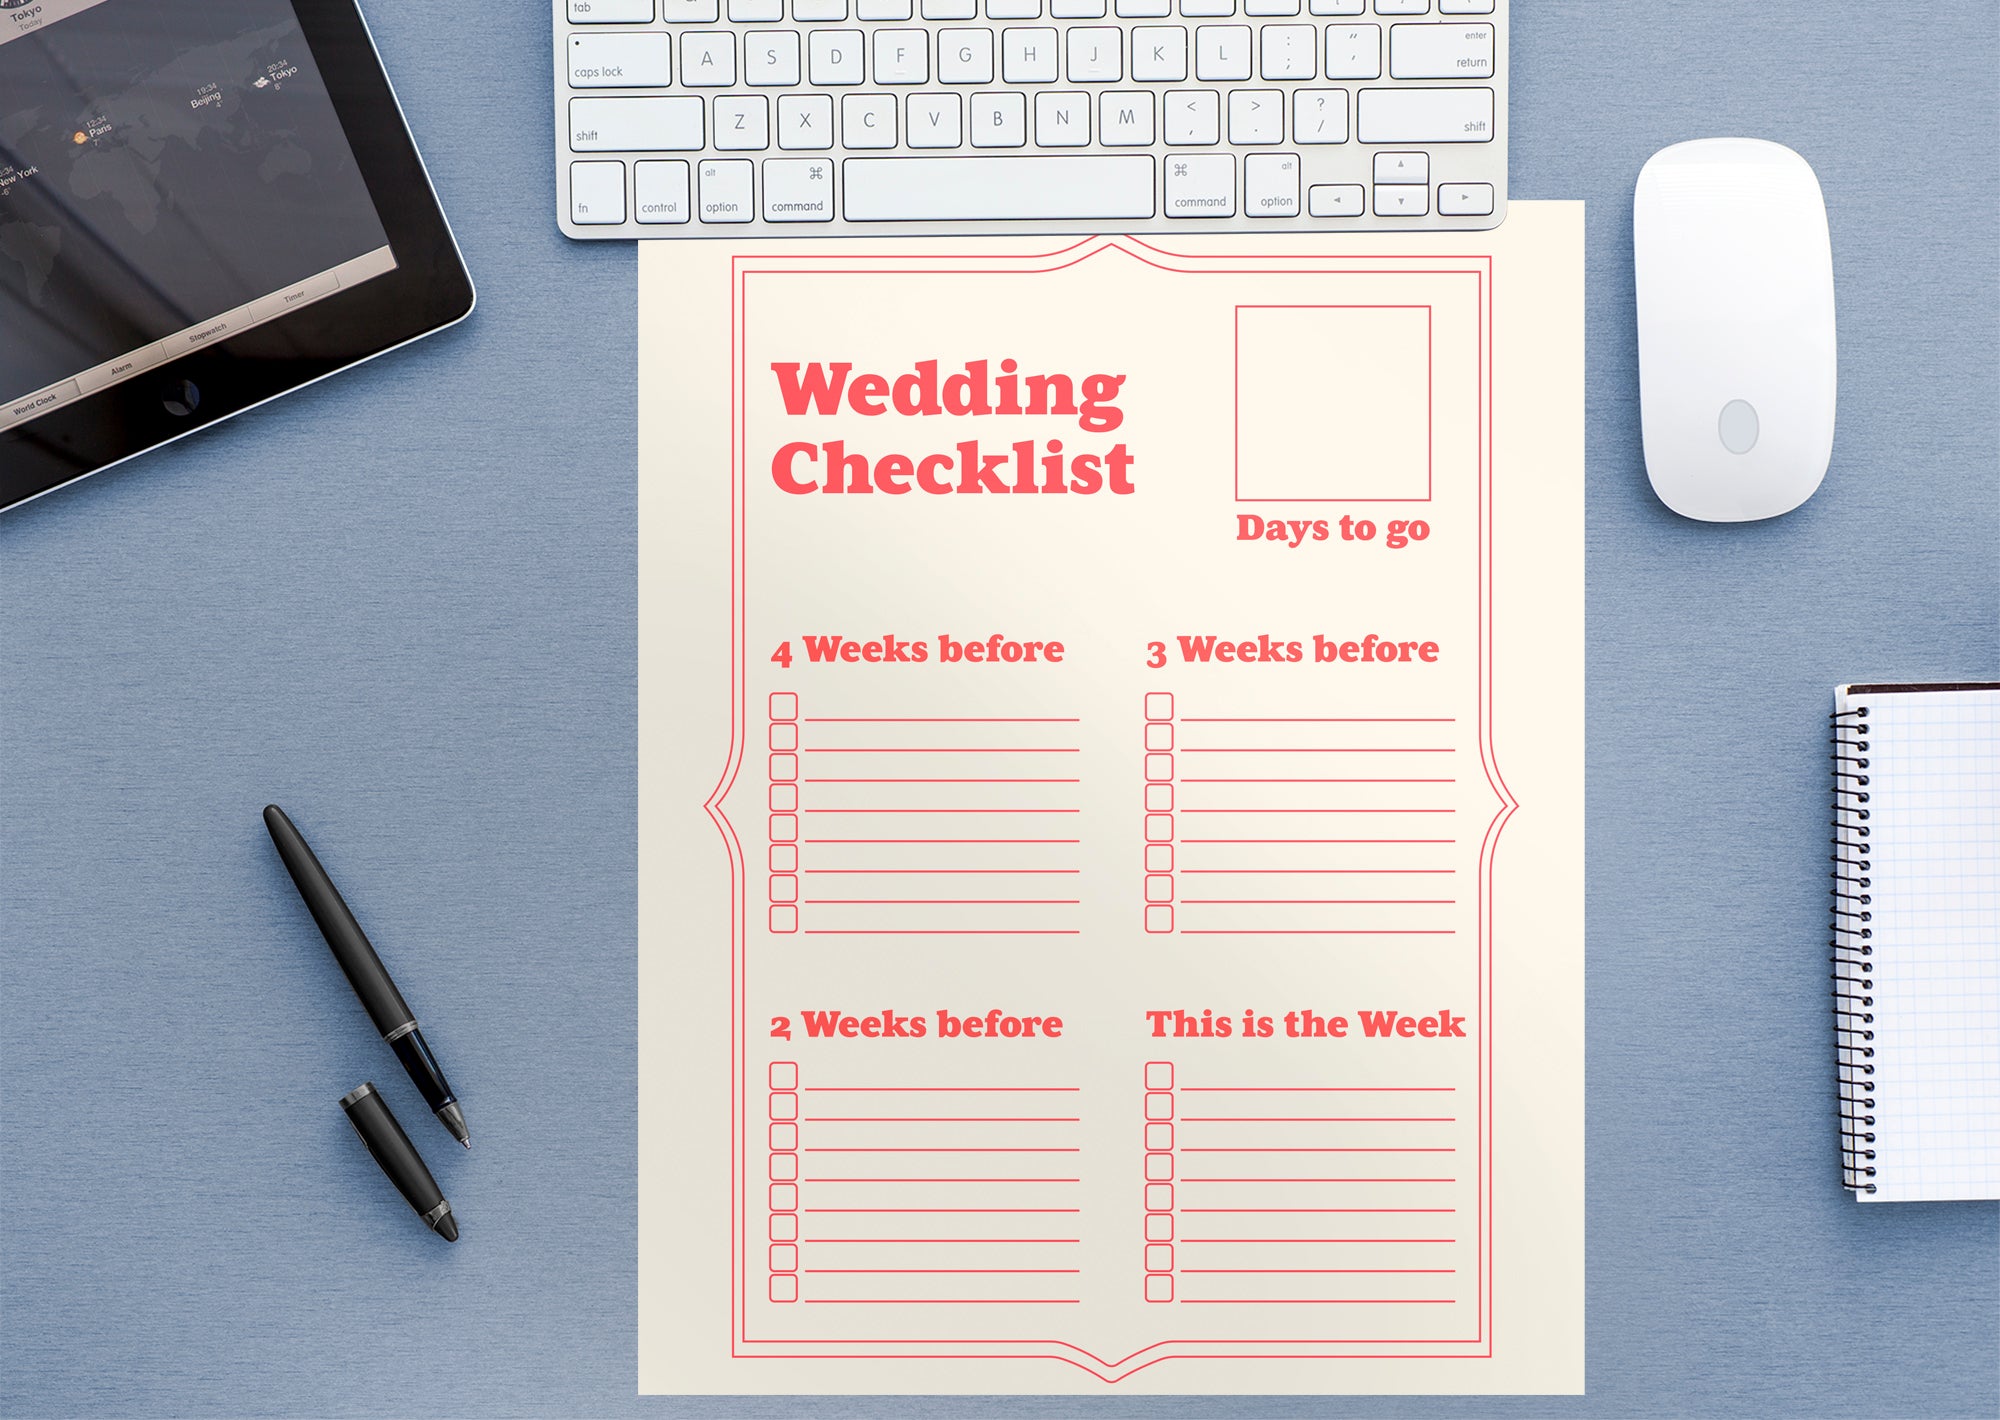 Dry Erase Wedding Checklist - Removable Wall Decal Large by Fathead | Vinyl